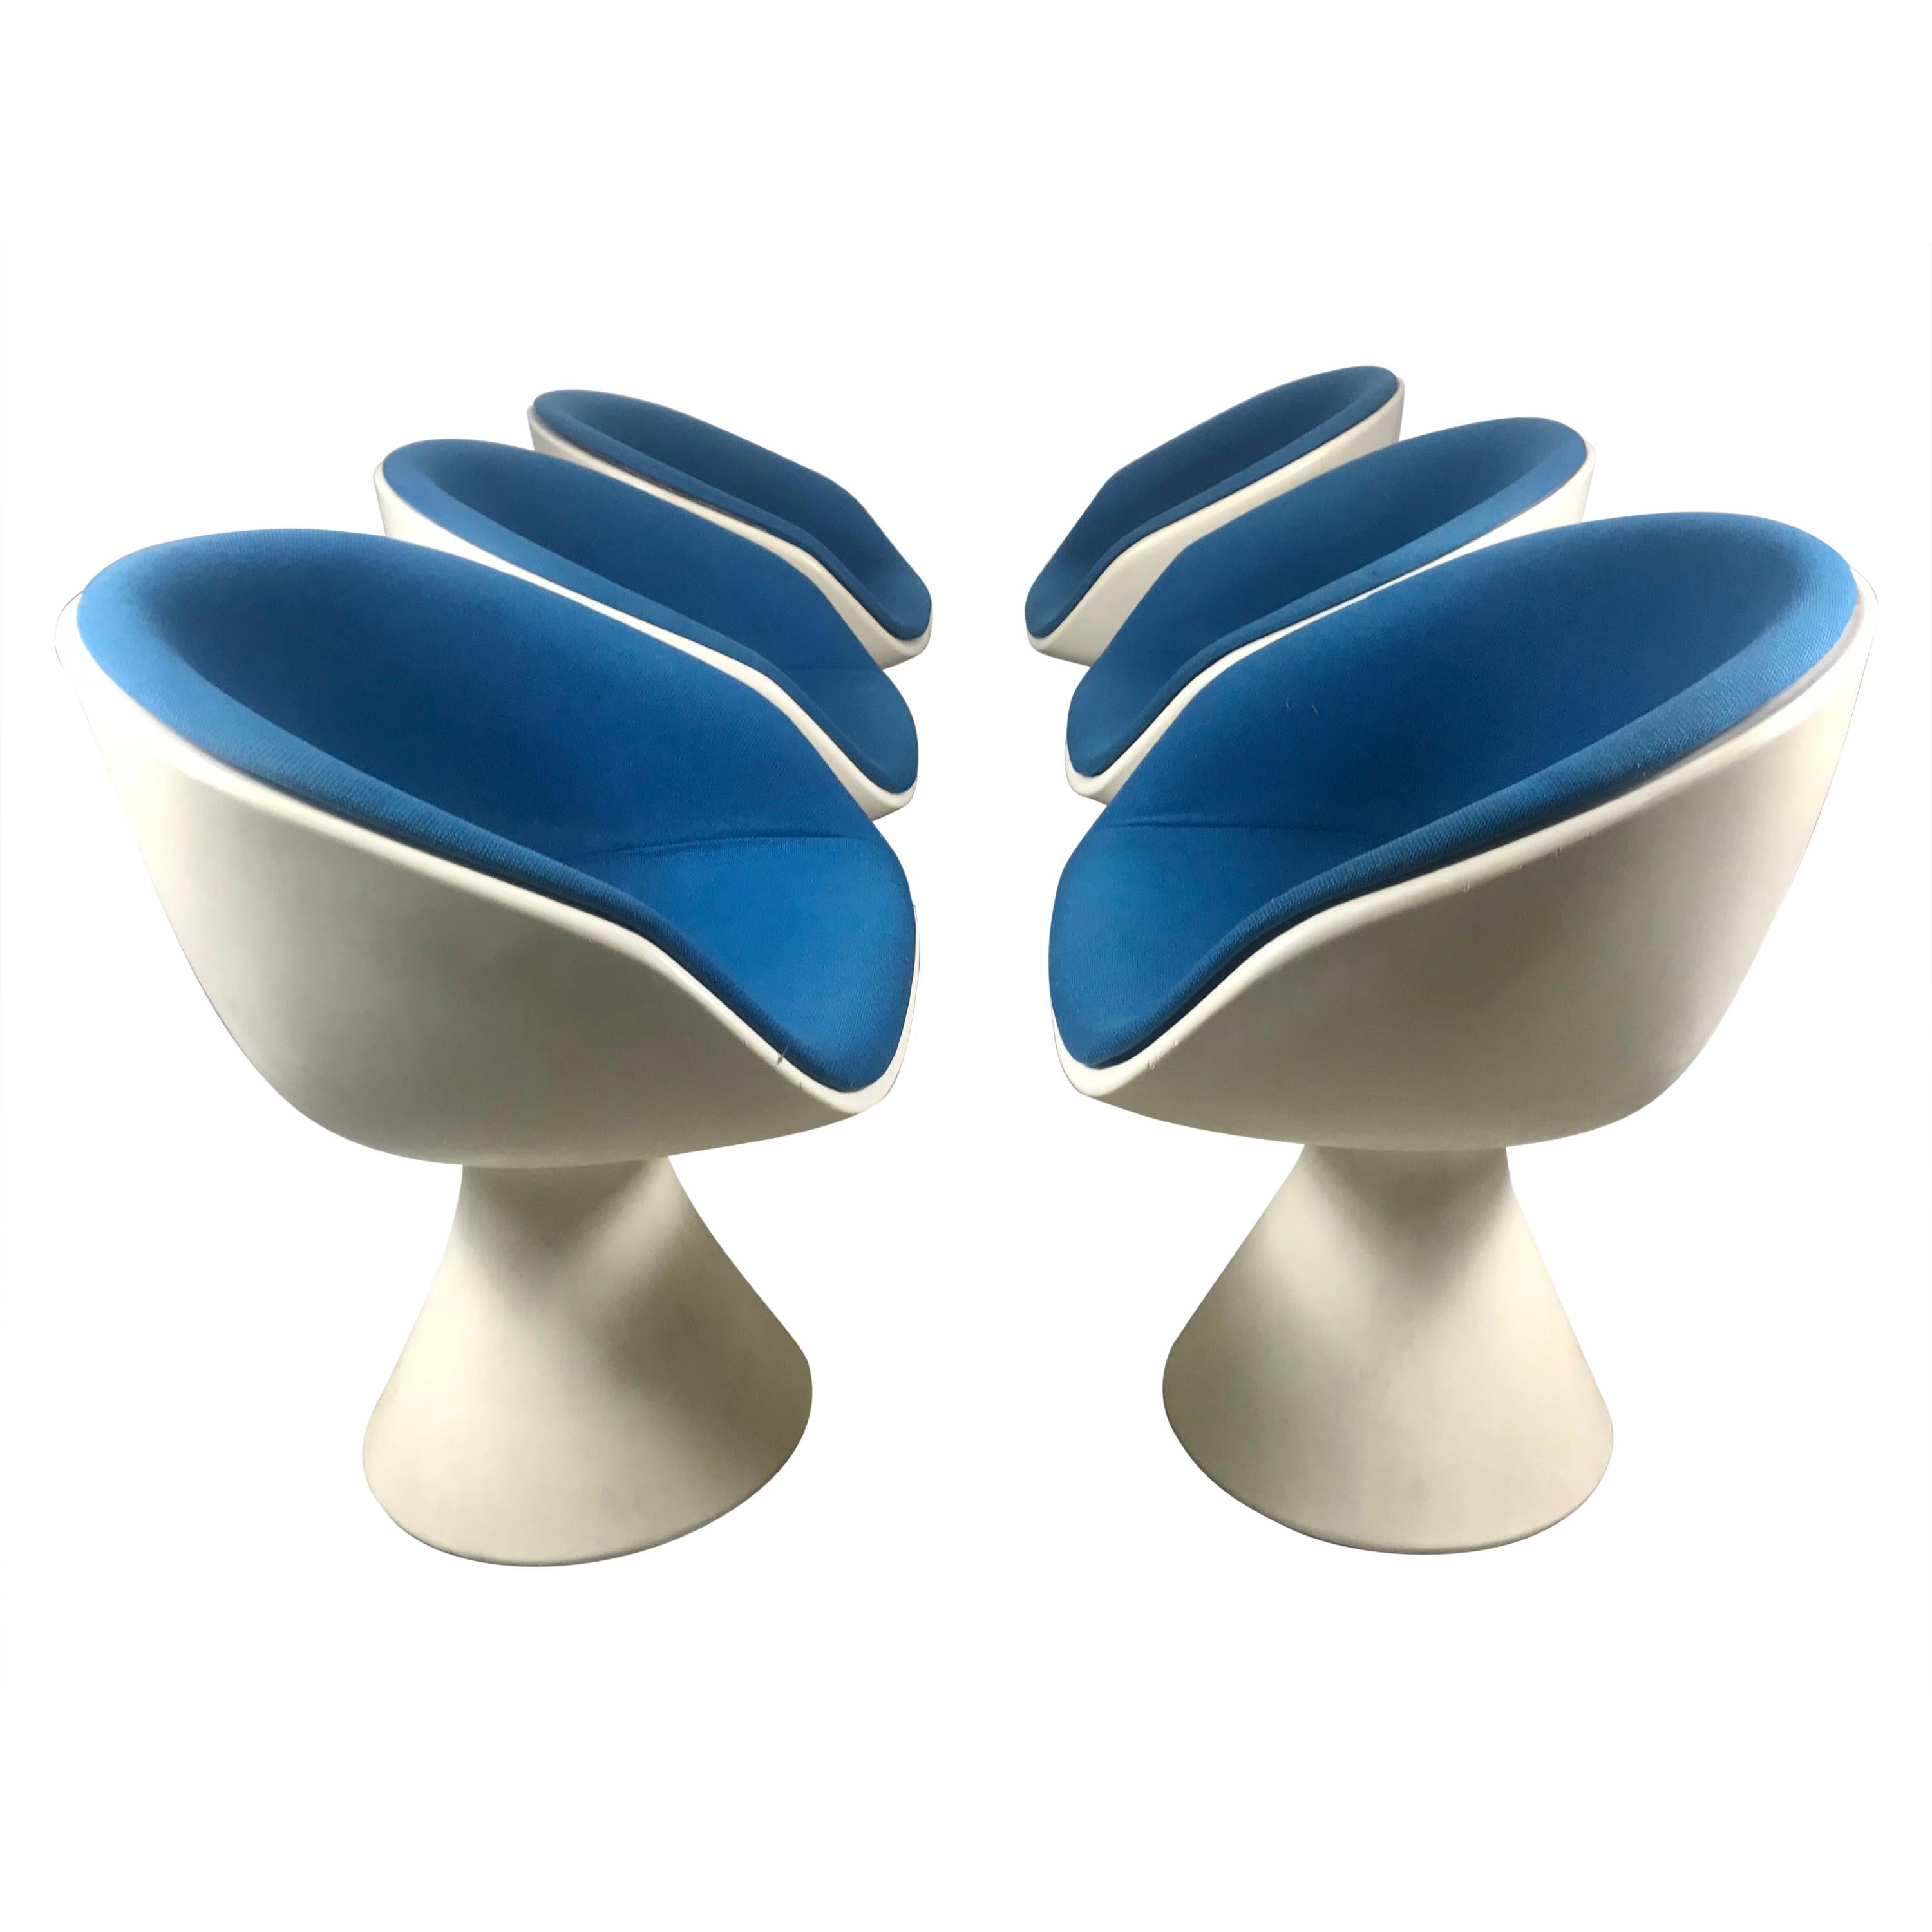 Six Modern Space Age Swivel Tulip chairs by Maurice Burke for Arkana, 1960s